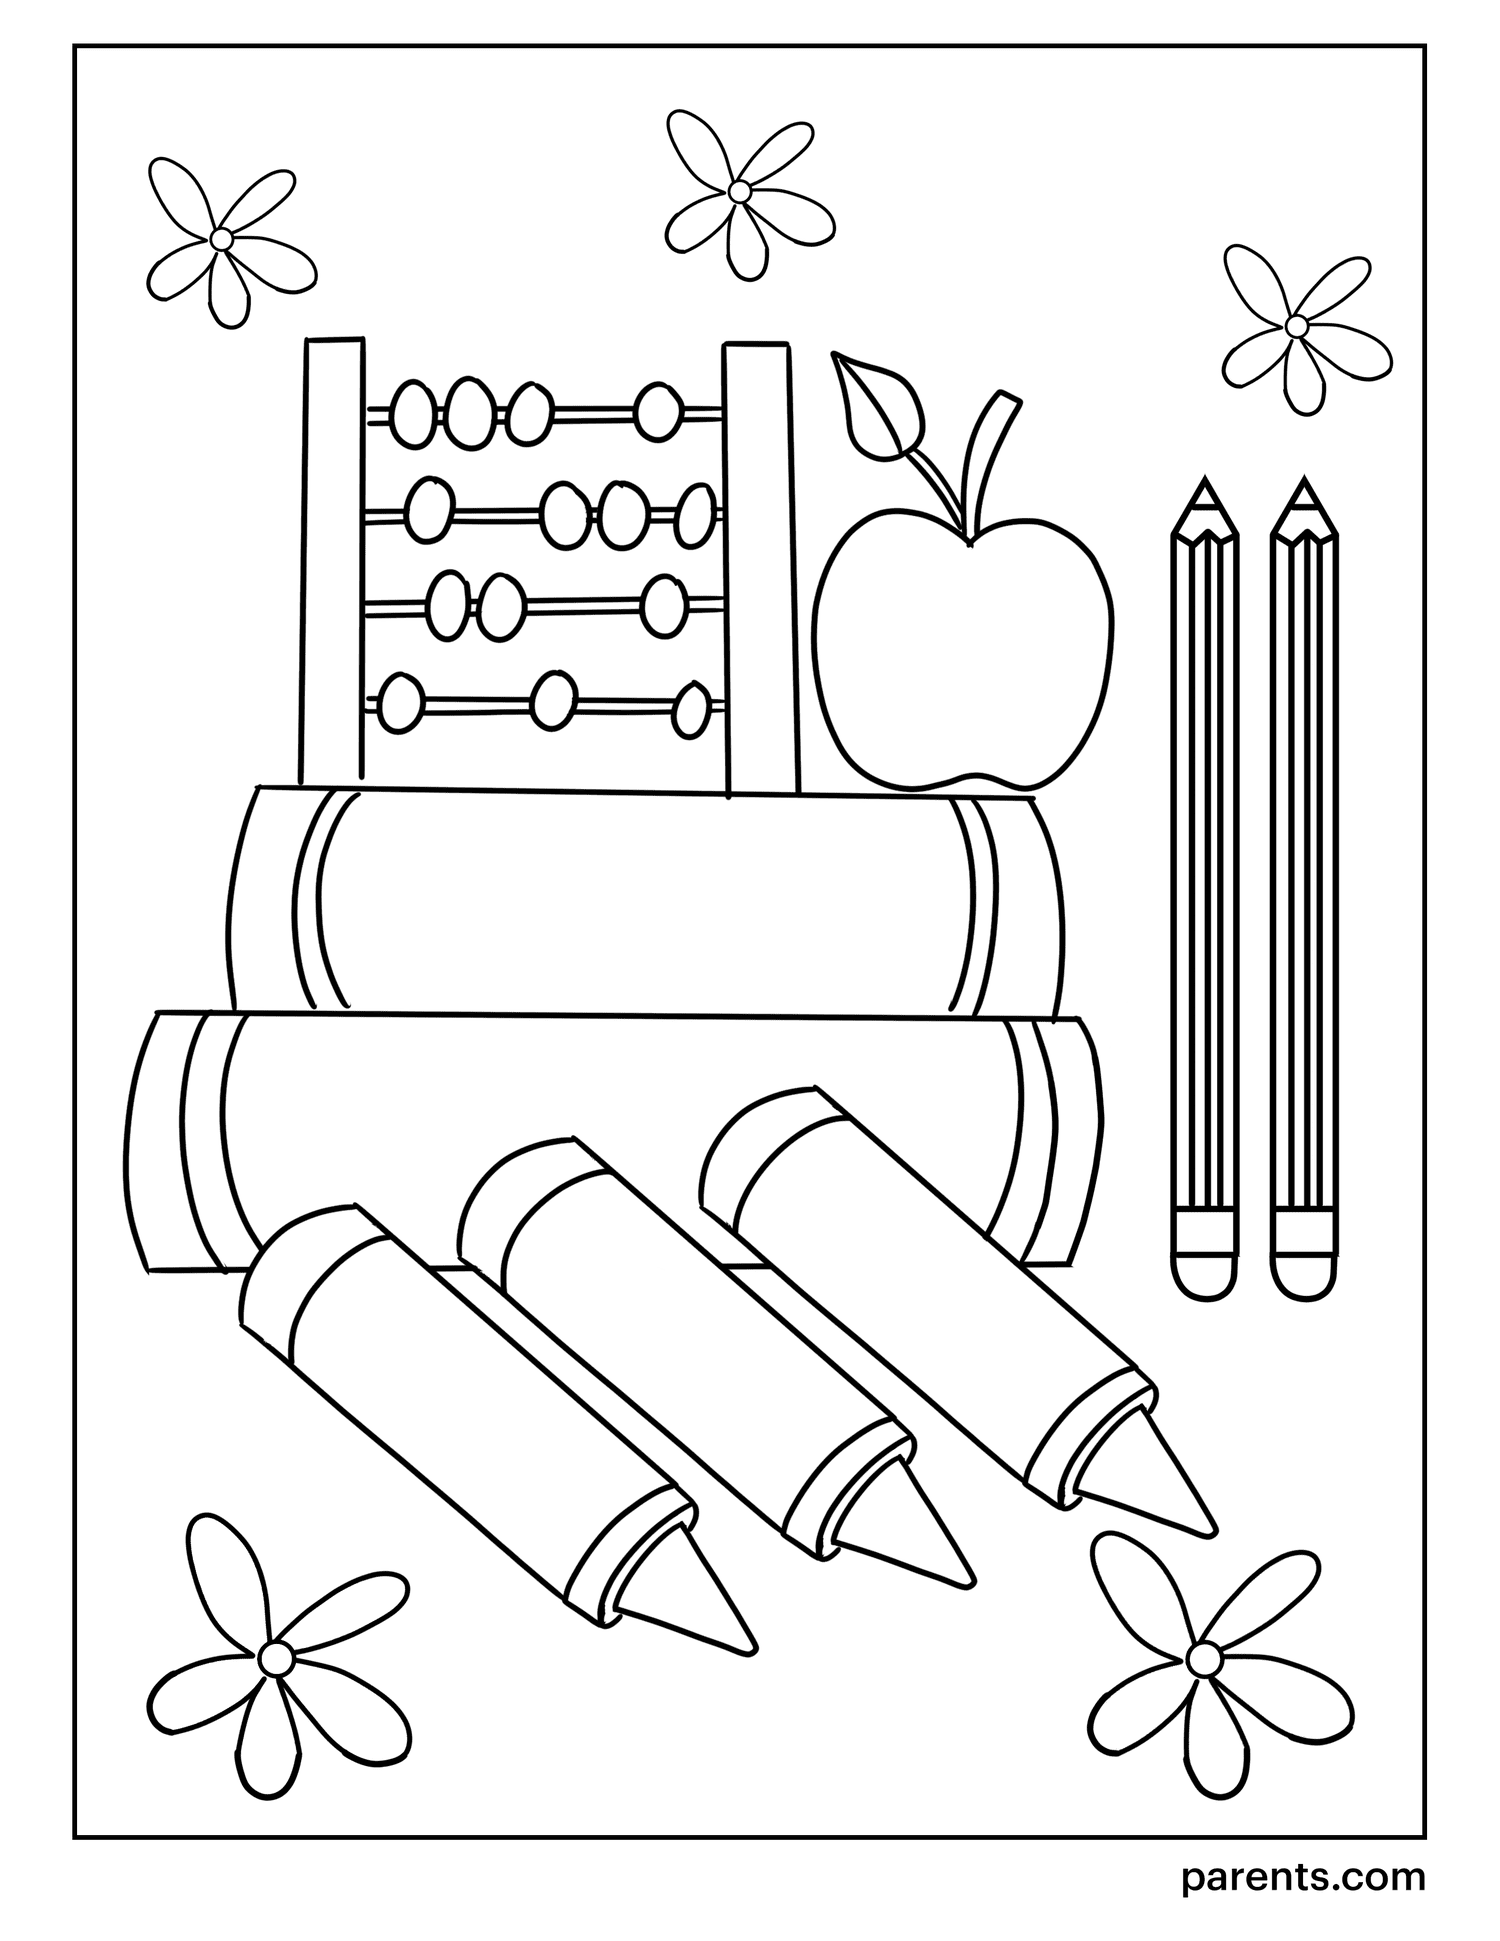 20 Printable Back to School Coloring Pages for Kids